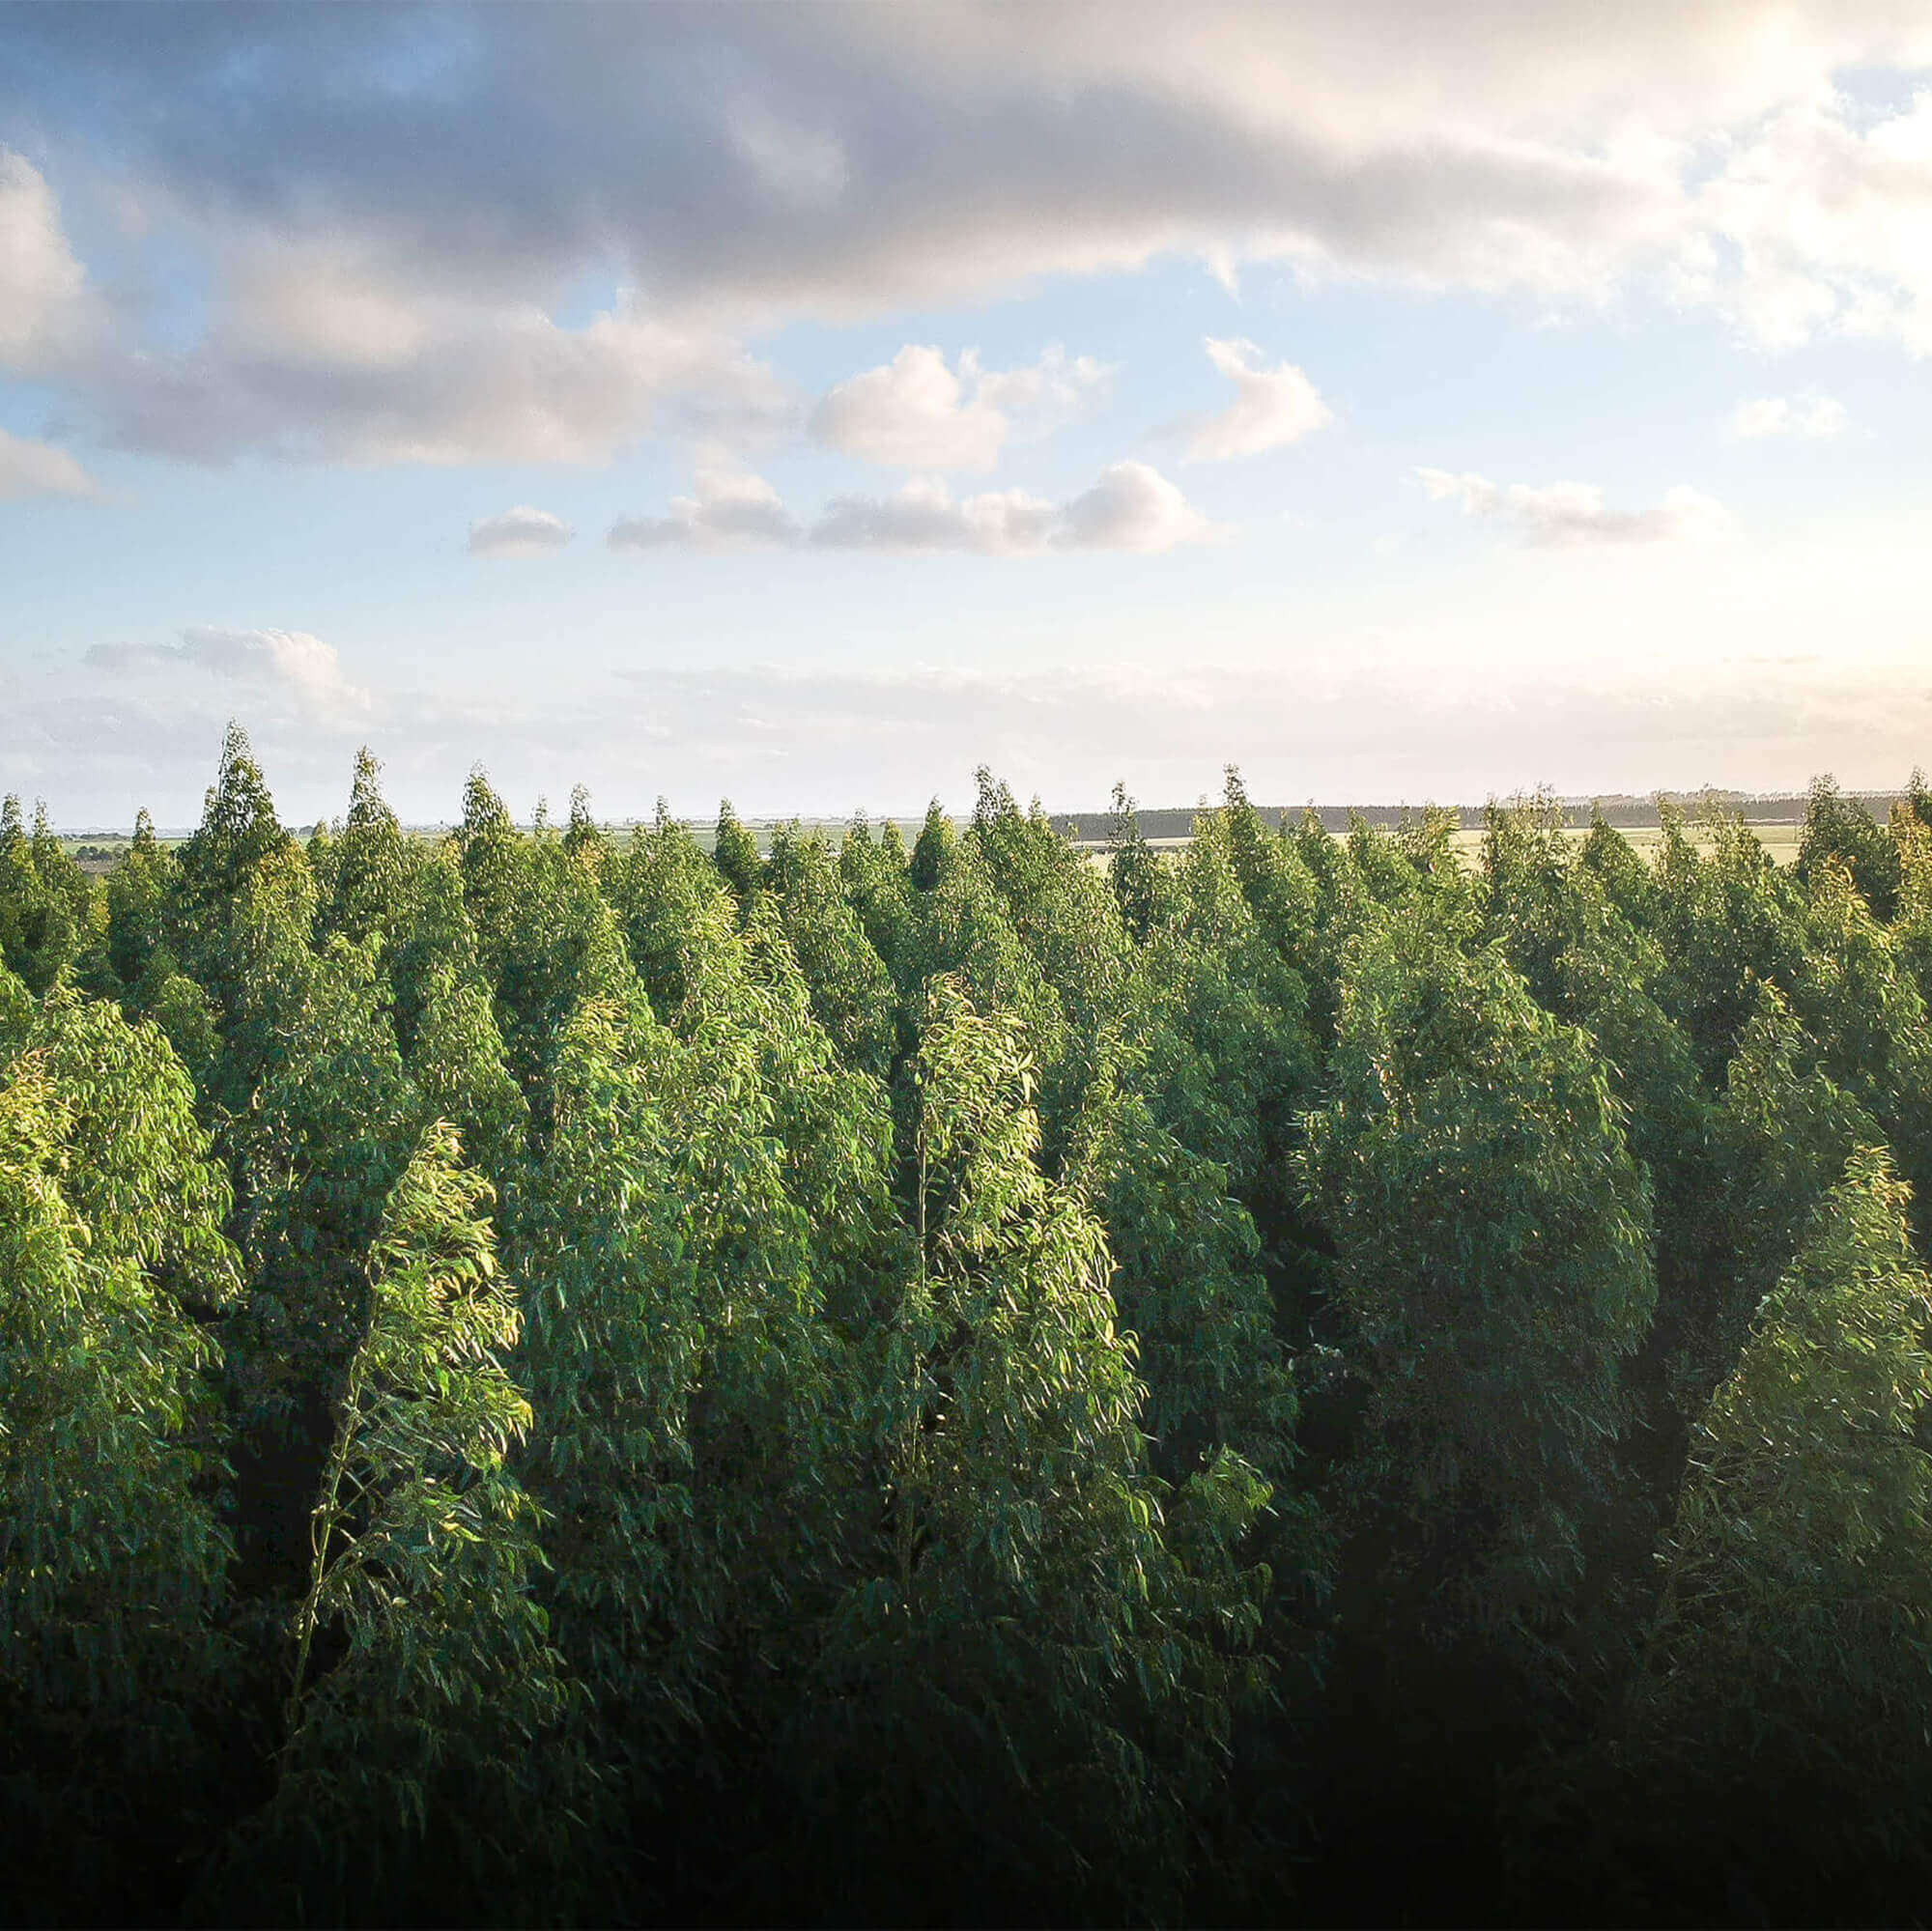 Forest of trees with blue sky and clouds in the background, aerial view